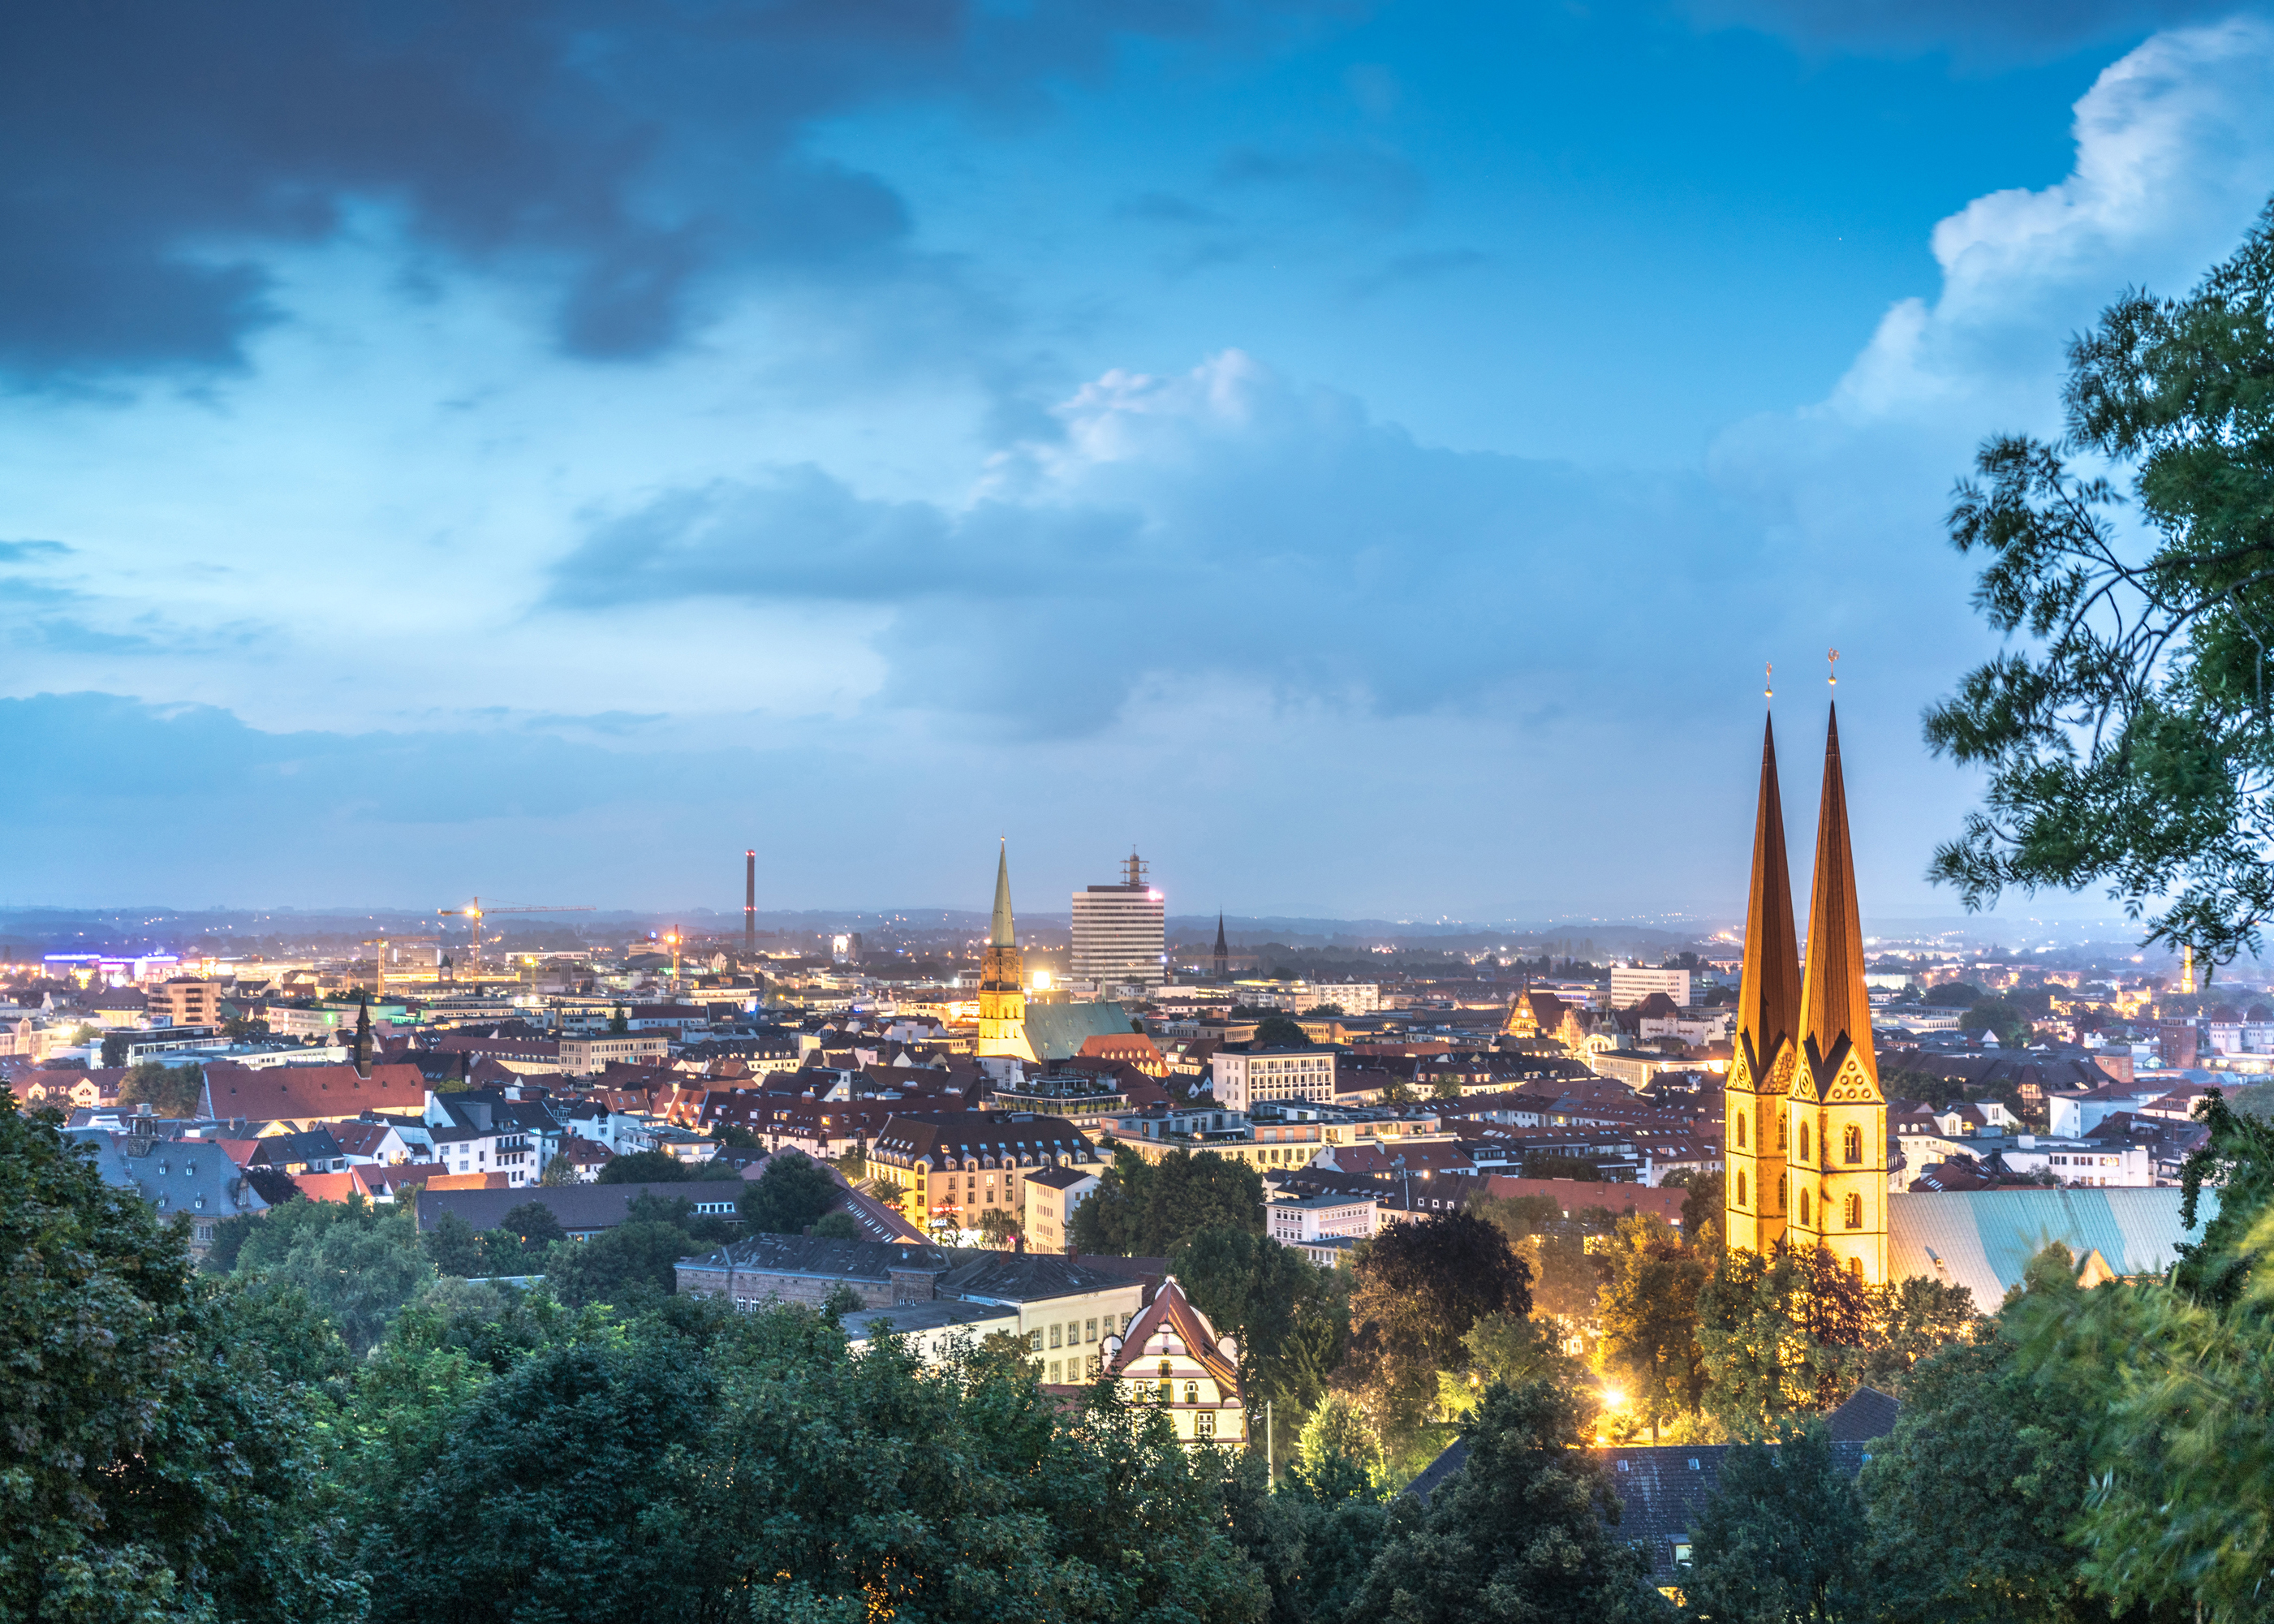 View on the City of Bielefeld at dusk